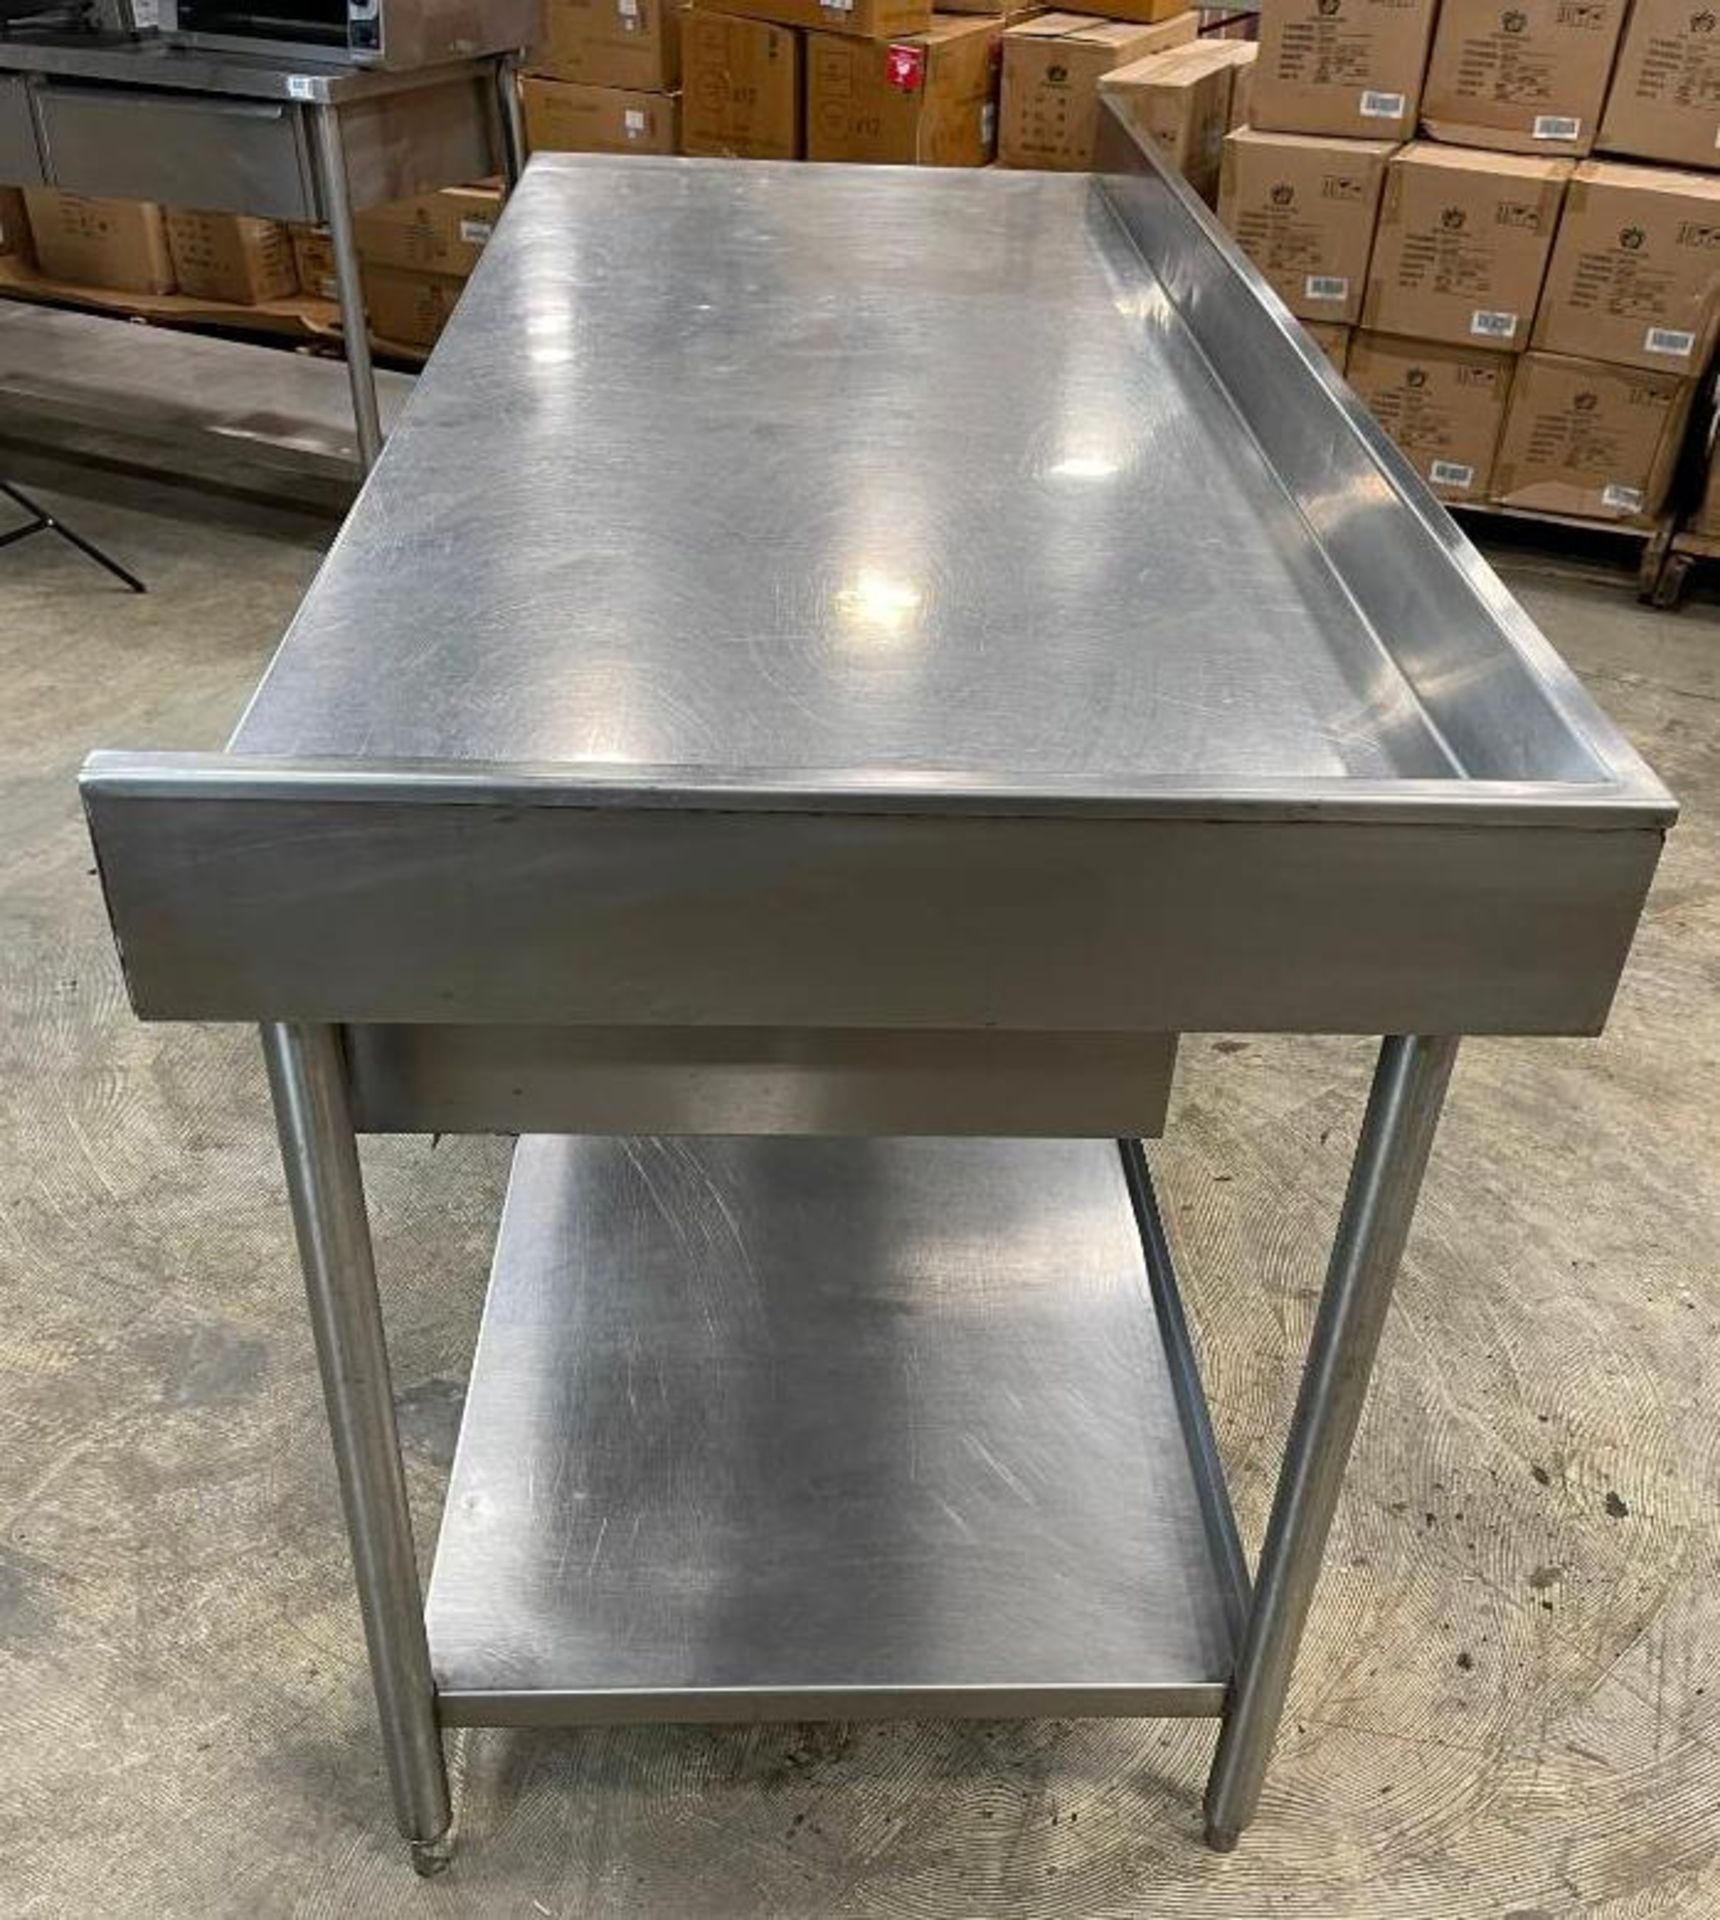 STAINLESS STEEL WORK TABLE WITH 3 DRAWERS AND UNDERSHELF - Image 3 of 11